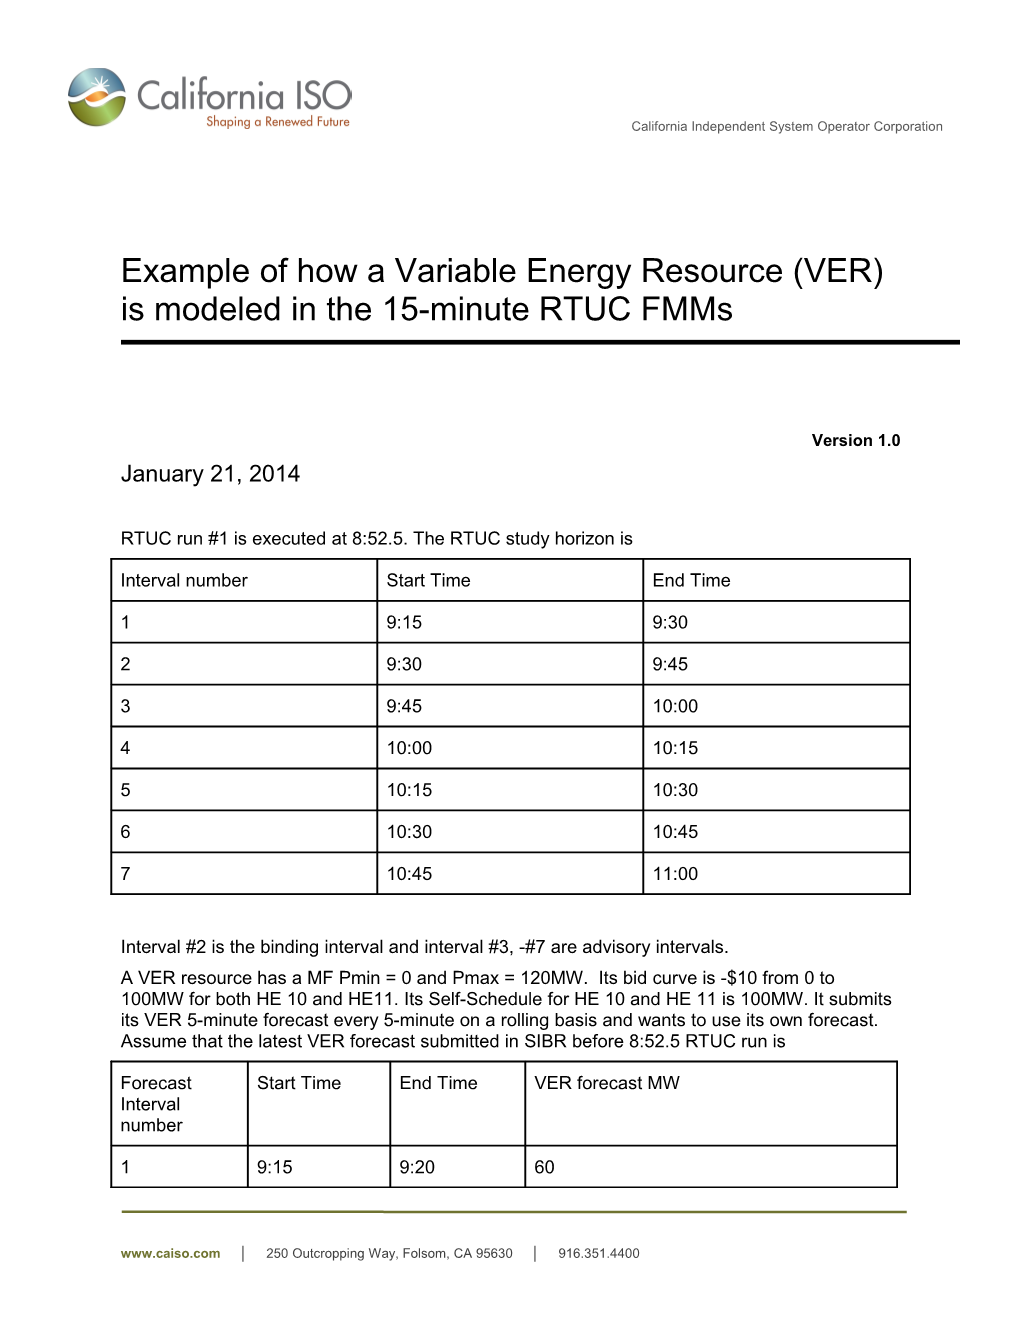 Example - How a Variable Energy Resource (VER) Is Modeled in 15-Minute RTUC Fmms